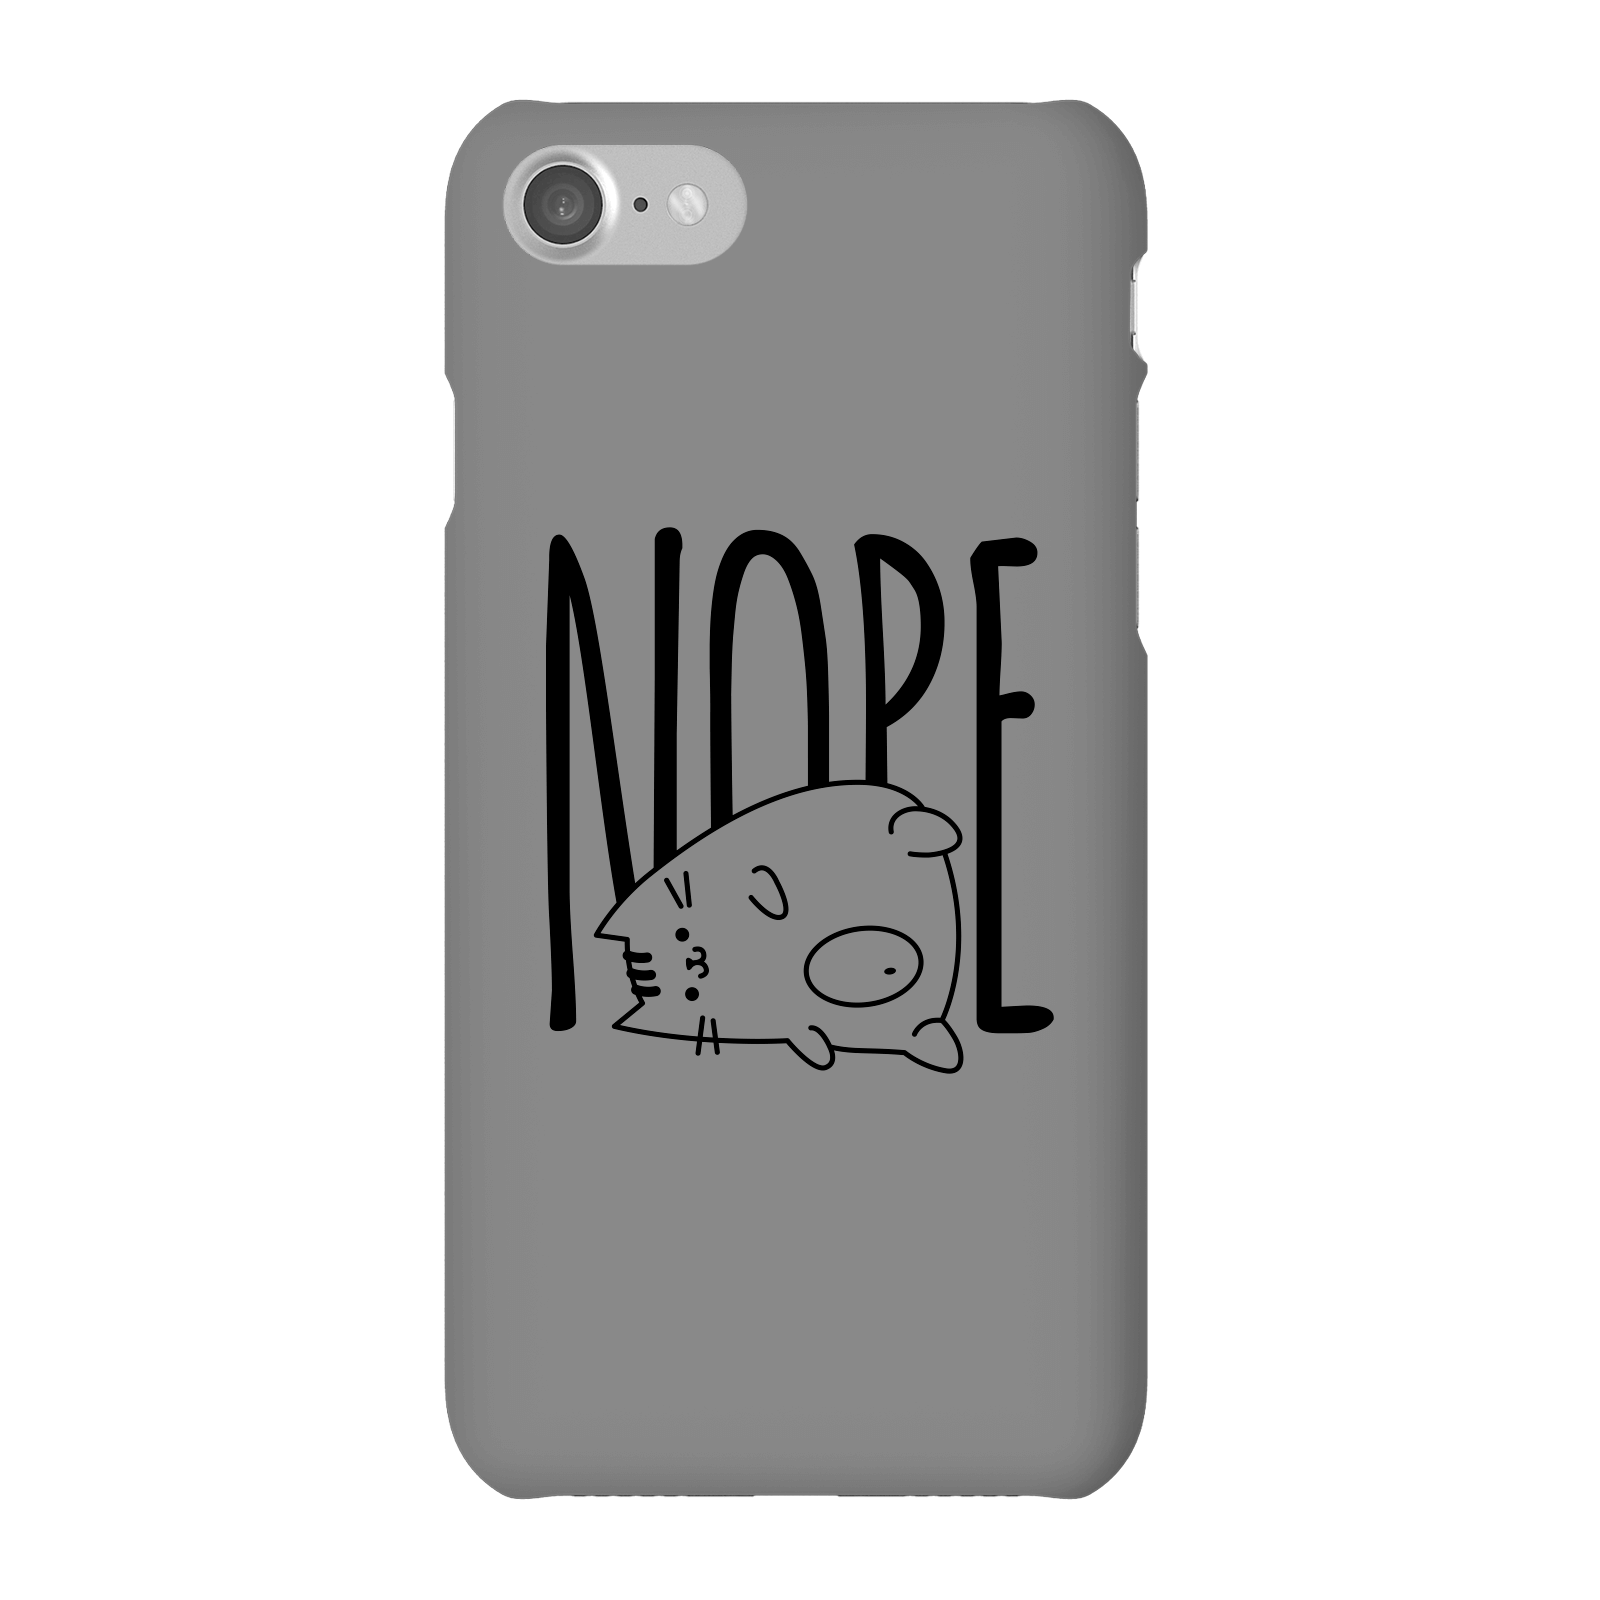 Nope Phone Case for iPhone and Android - iPhone 7 - Snap Case - Gloss